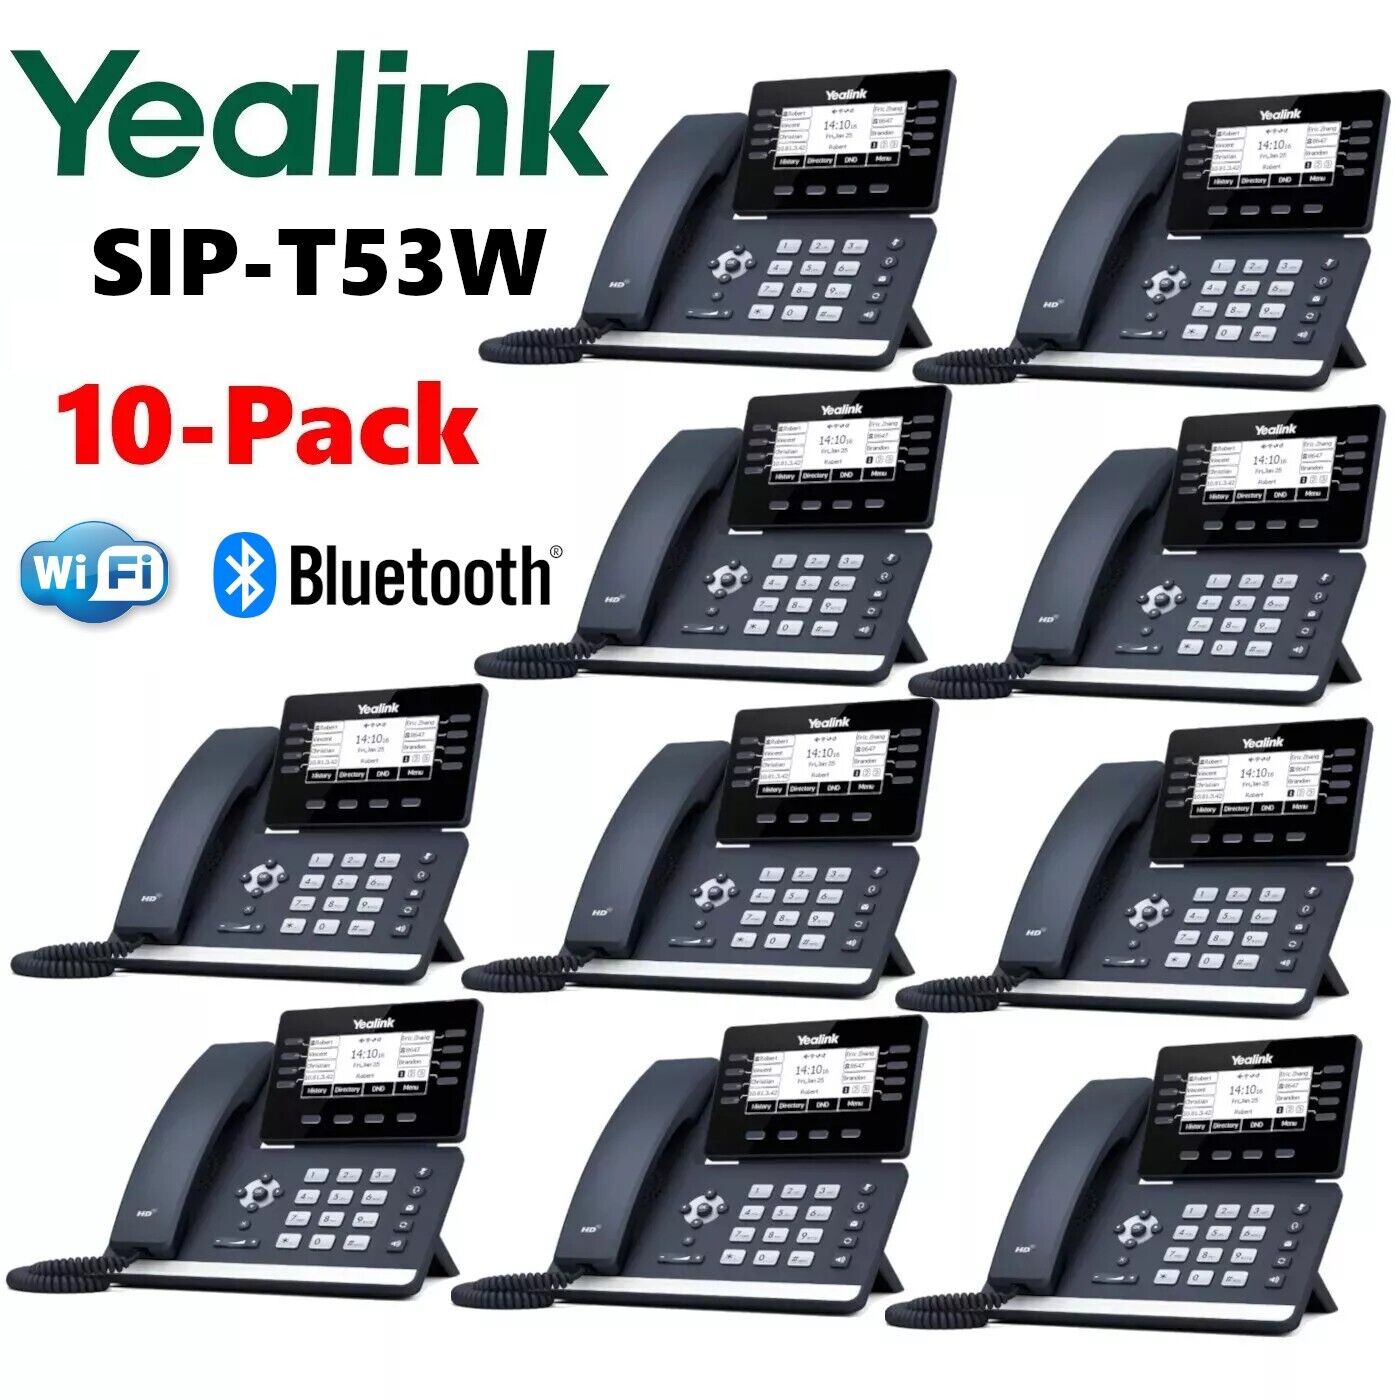 10 Pack Lot Yealink SIP-T53W Prime Business Phone T53W Bluetooth WiFi